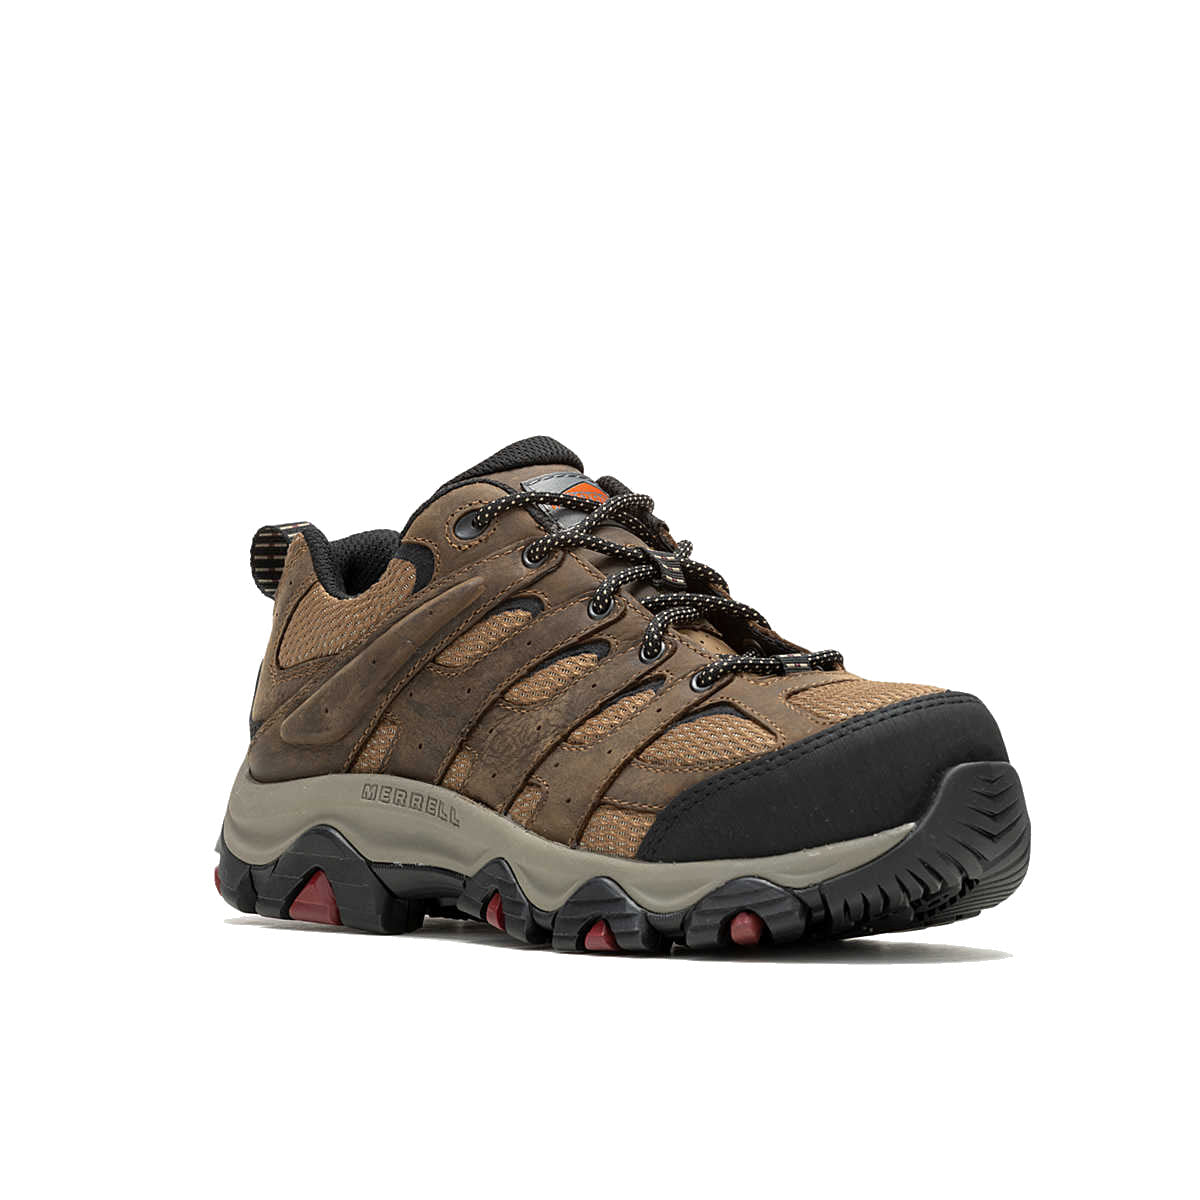 A single brown Merrell Moab Vertex 2 Low hiking shoe with a heat-resistant outsole and black and red accents on a white background.